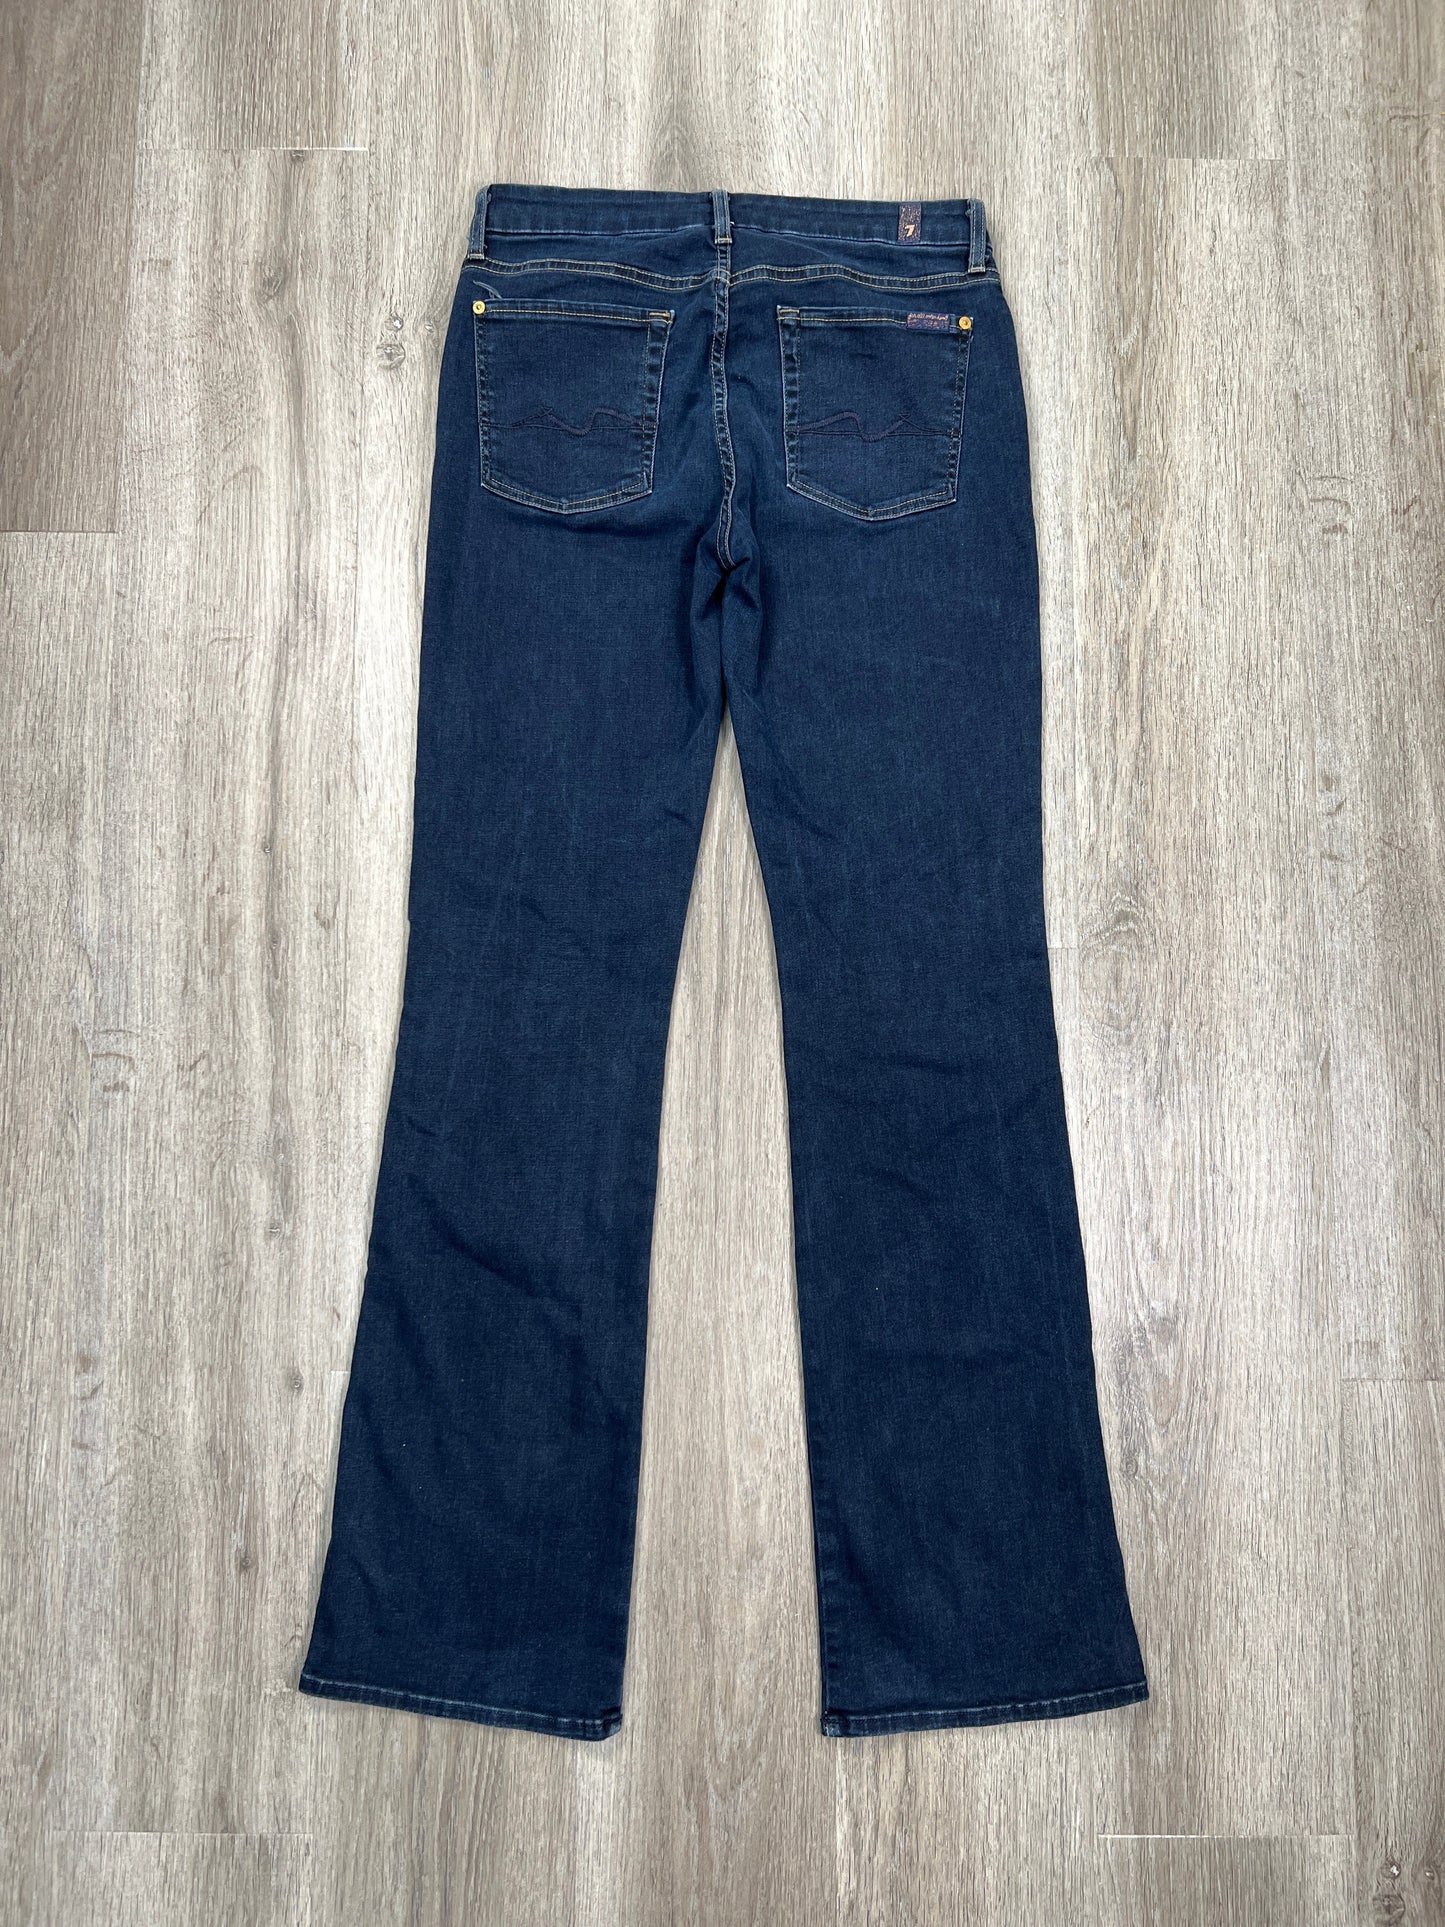 Jeans Boot Cut By 7 For All Mankind  Size: L